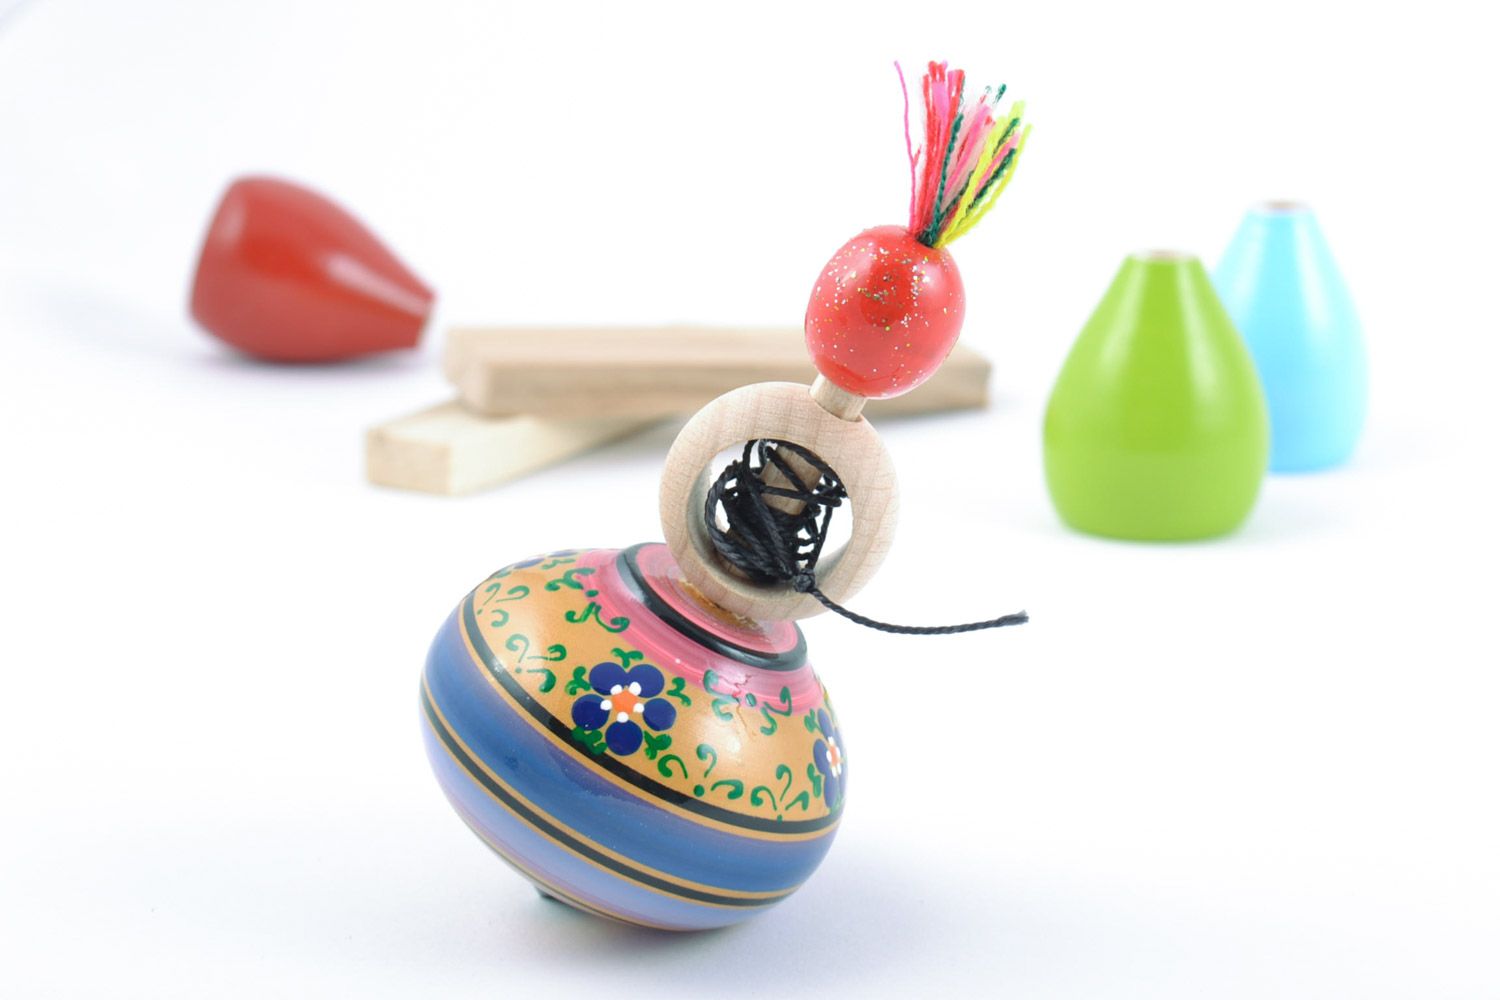 Handmade painted wooden spinning top toy for fine motor skills development photo 1